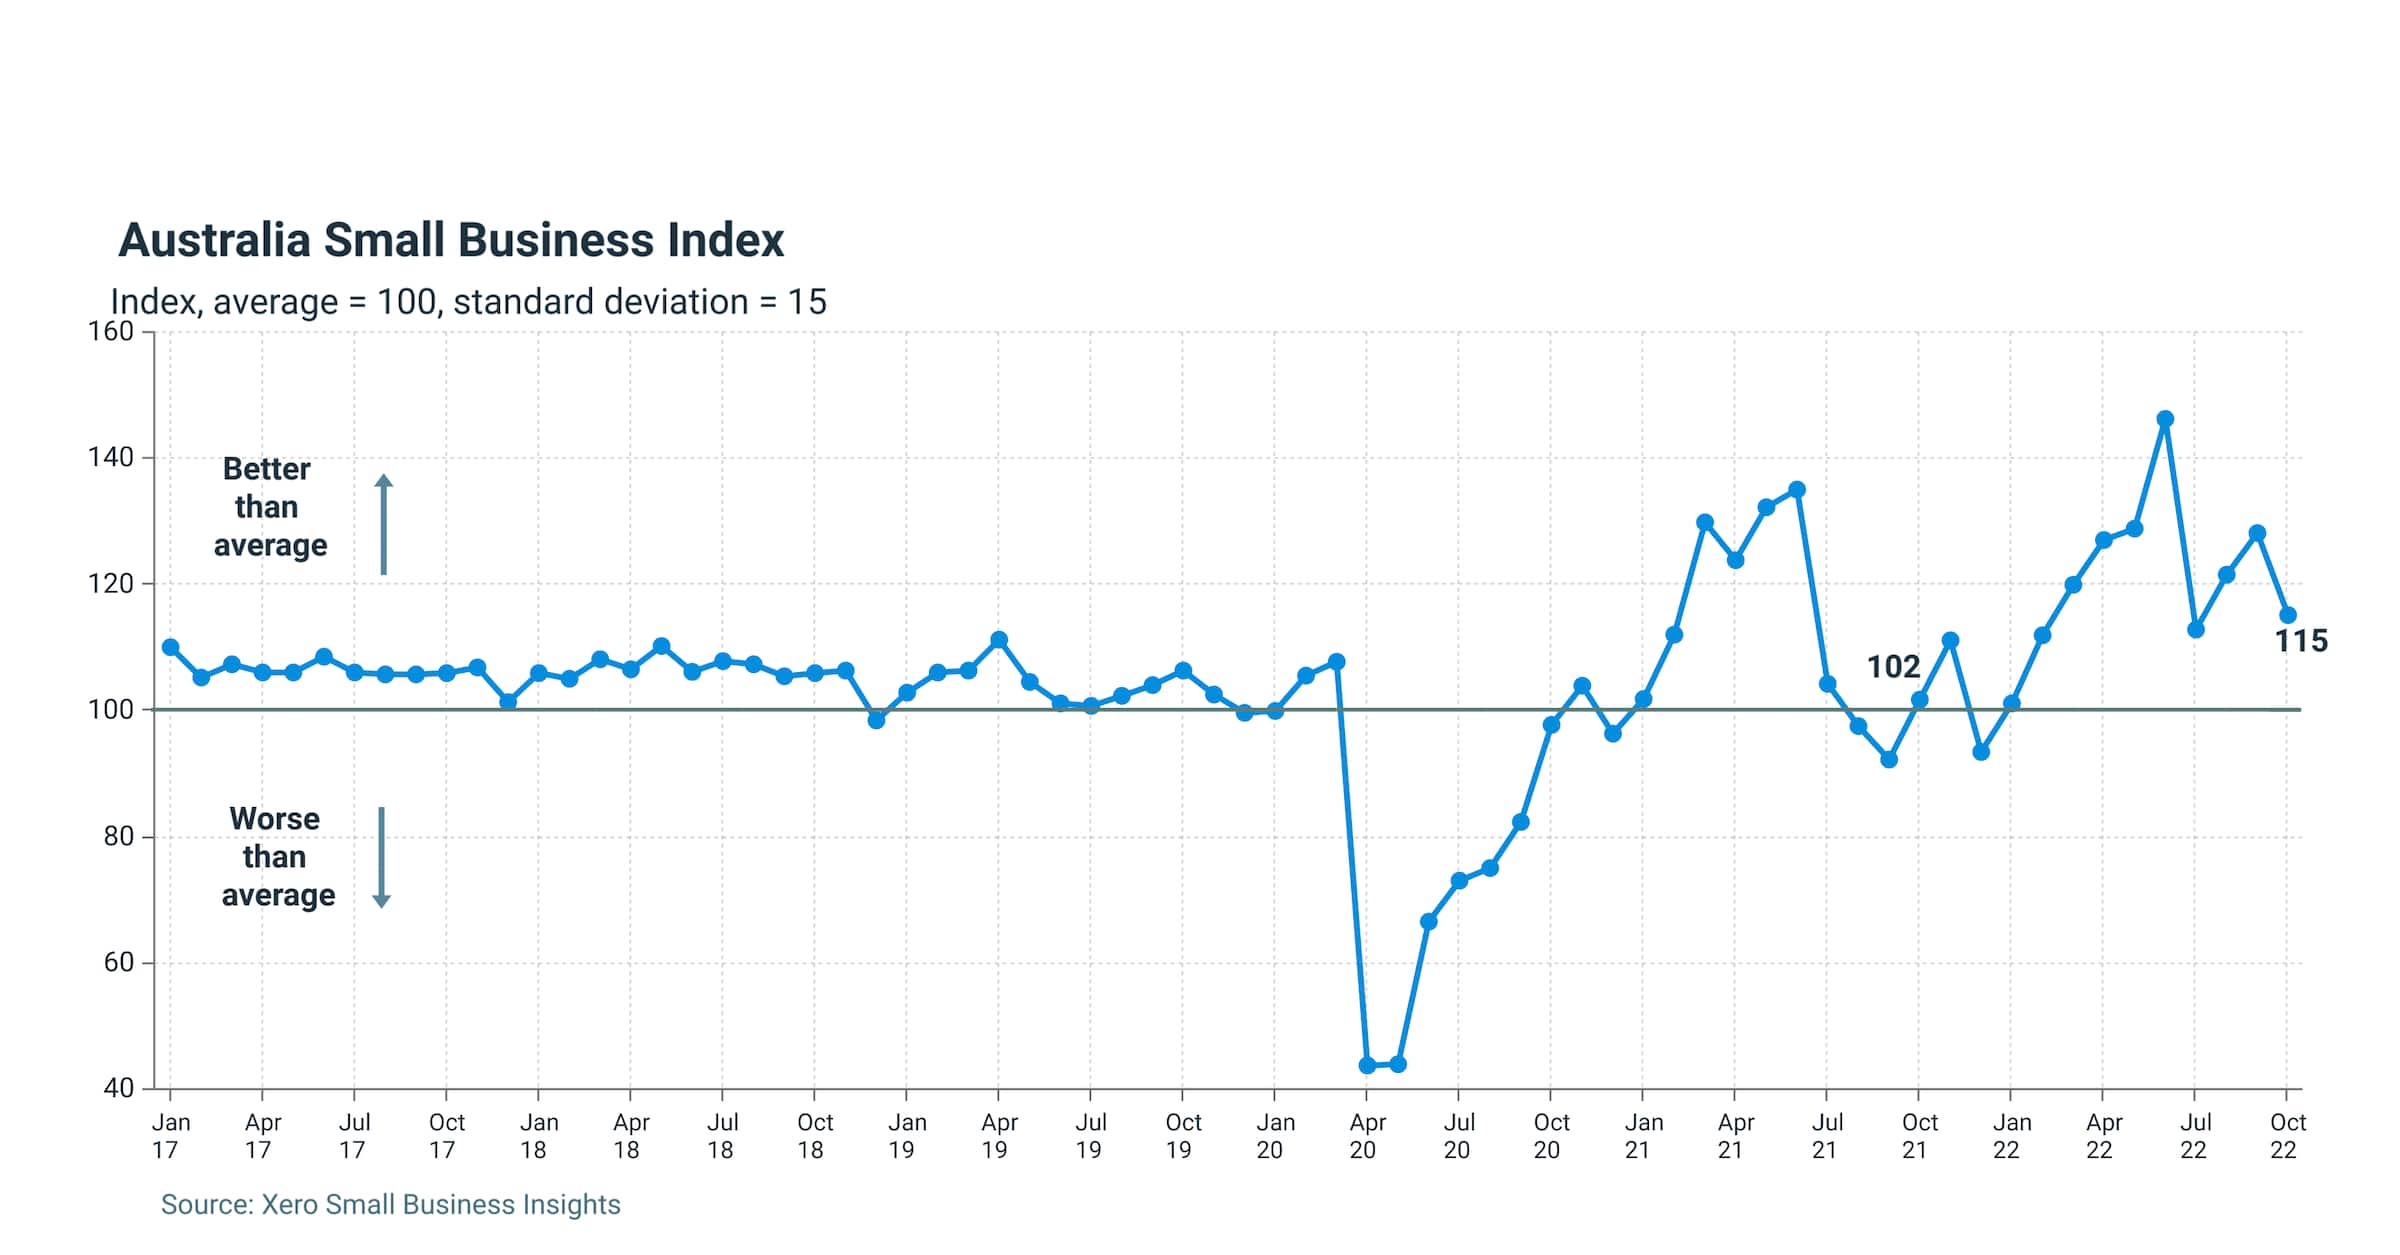 Graph showing 13 point drop in Australian Small Business Index for the month of October 2022, down to 115 points